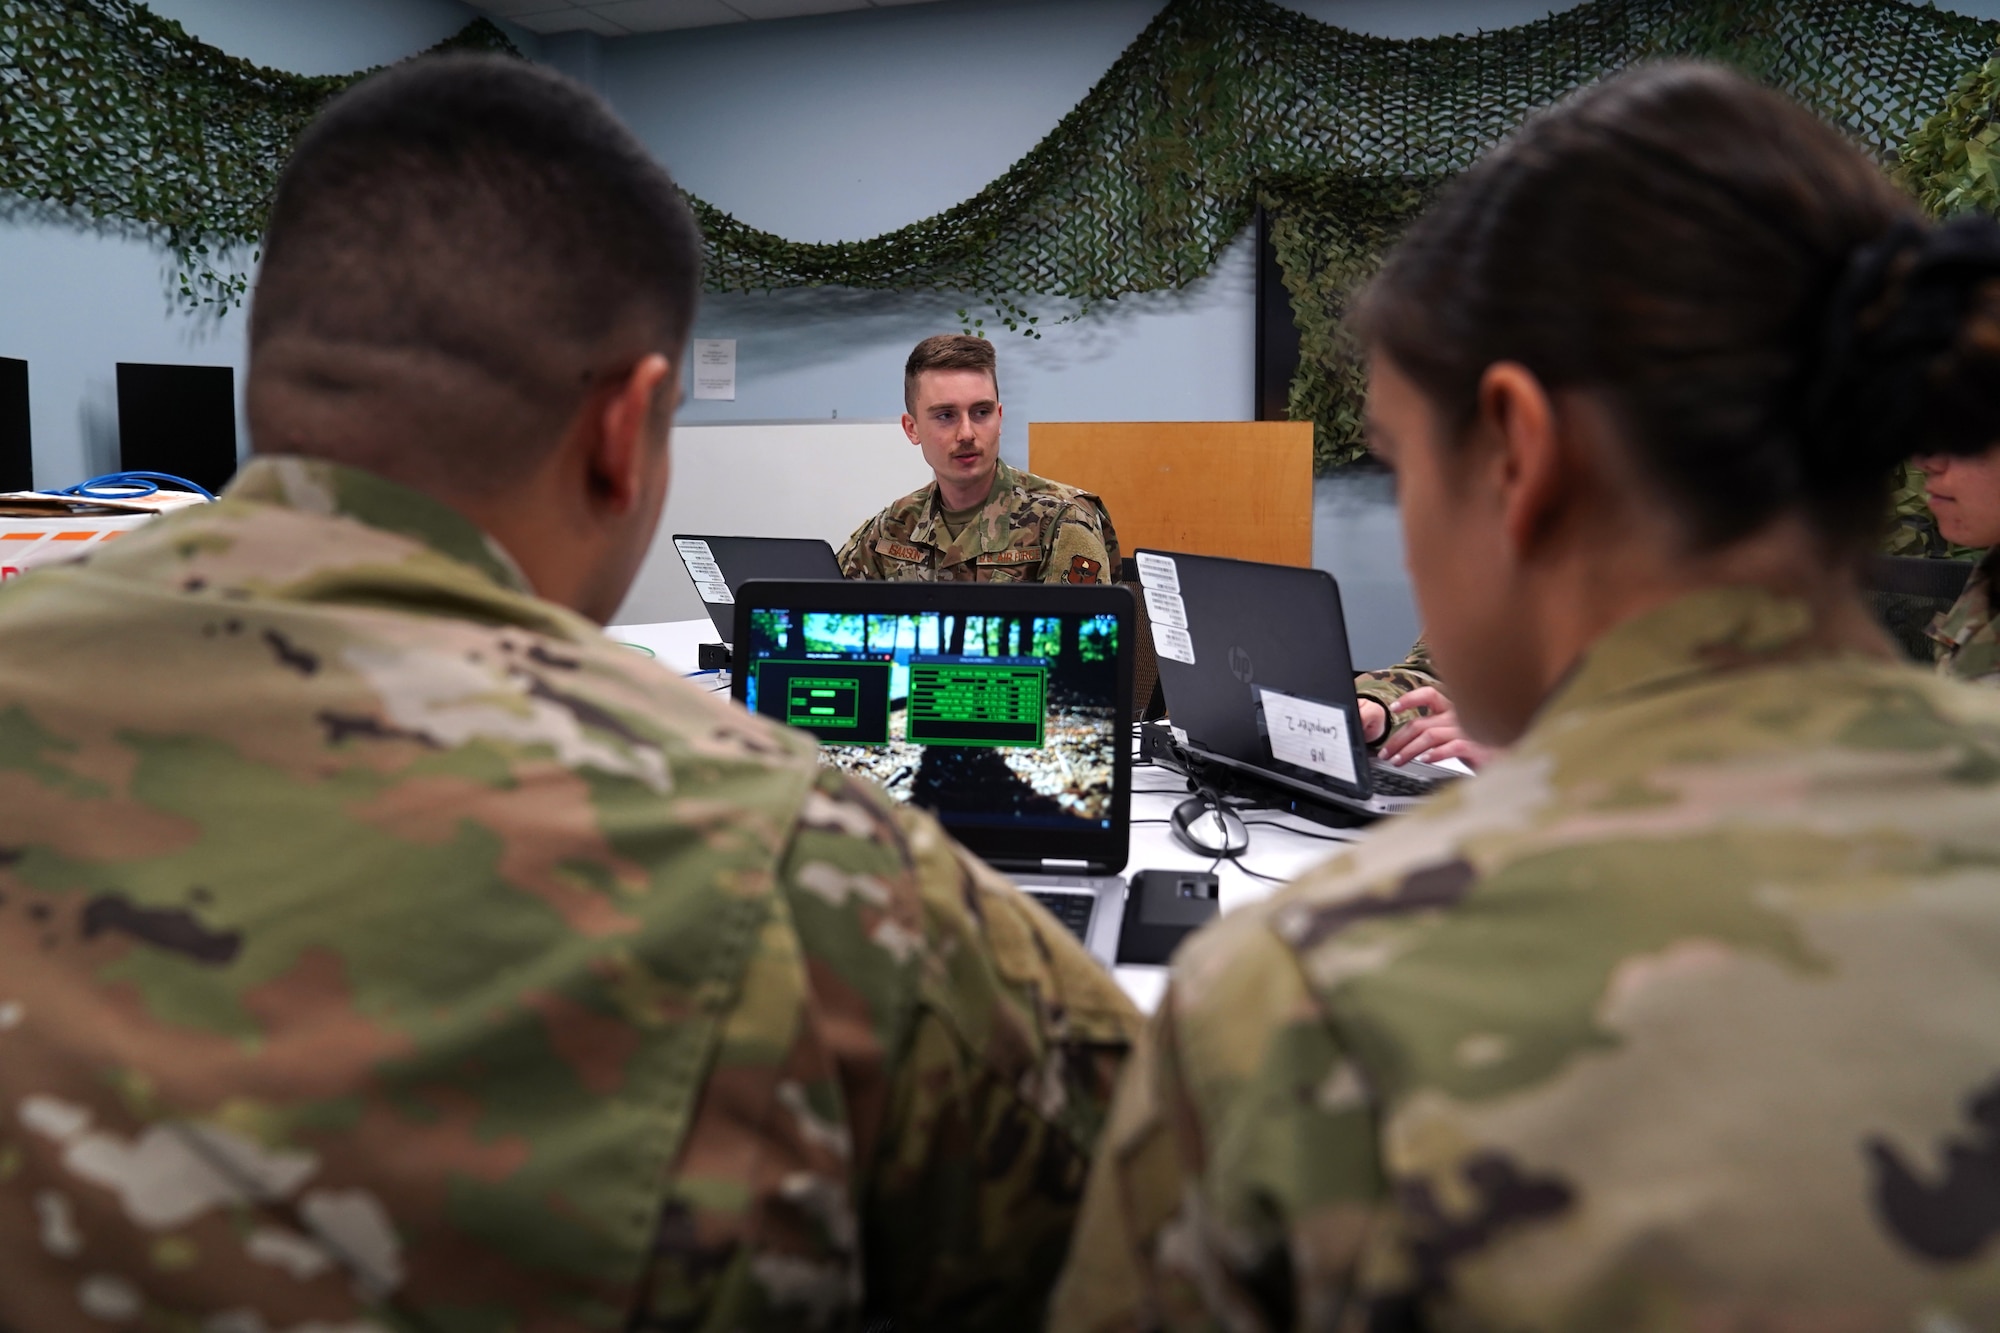 U.S. Space Force 2nd Lt. Anthony Gomez, U.S. Air Force 2nd Lt. Ethan Isaacson and 2nd Lt. Mackenzie Clay, 333rd Training Squadron cyber warfare officers, complete cyber tasks in the cyber escape room inside Stennis Hall at Keesler Air Force Base, Mississippi, November 10, 2021. The escape room was implemented into the squadron to test the capabilities of cyber warfare students and sharpen their skillset. (U.S. Air Force photo by Senior Airman Seth Haddix)